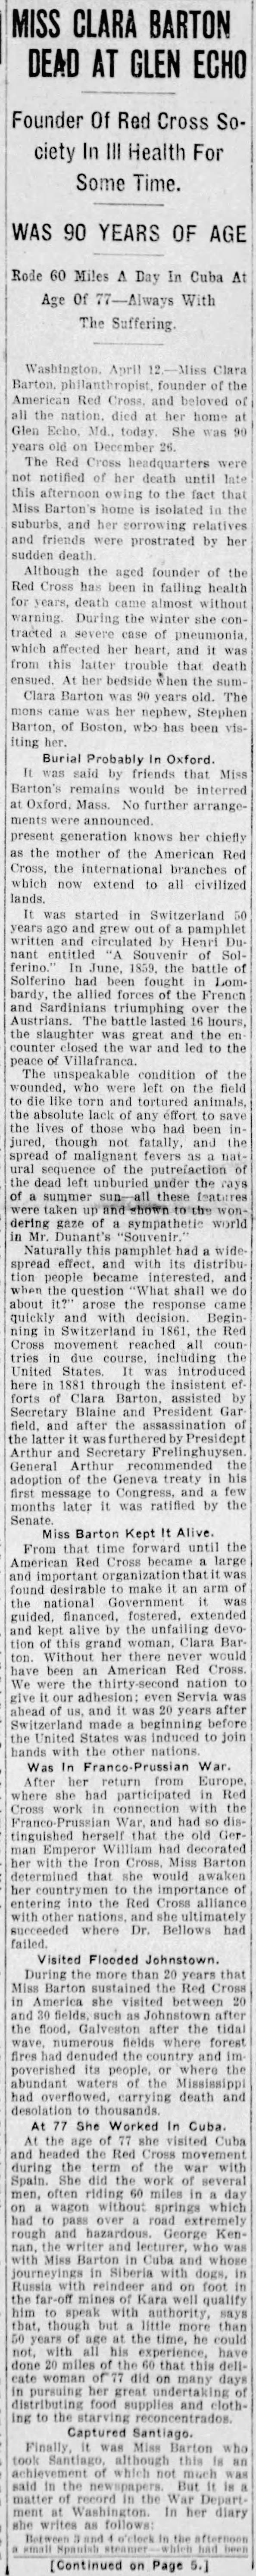 Excerpt from Clara Barton obituary printed in Baltimore paper on April 12, 1912, day of her death